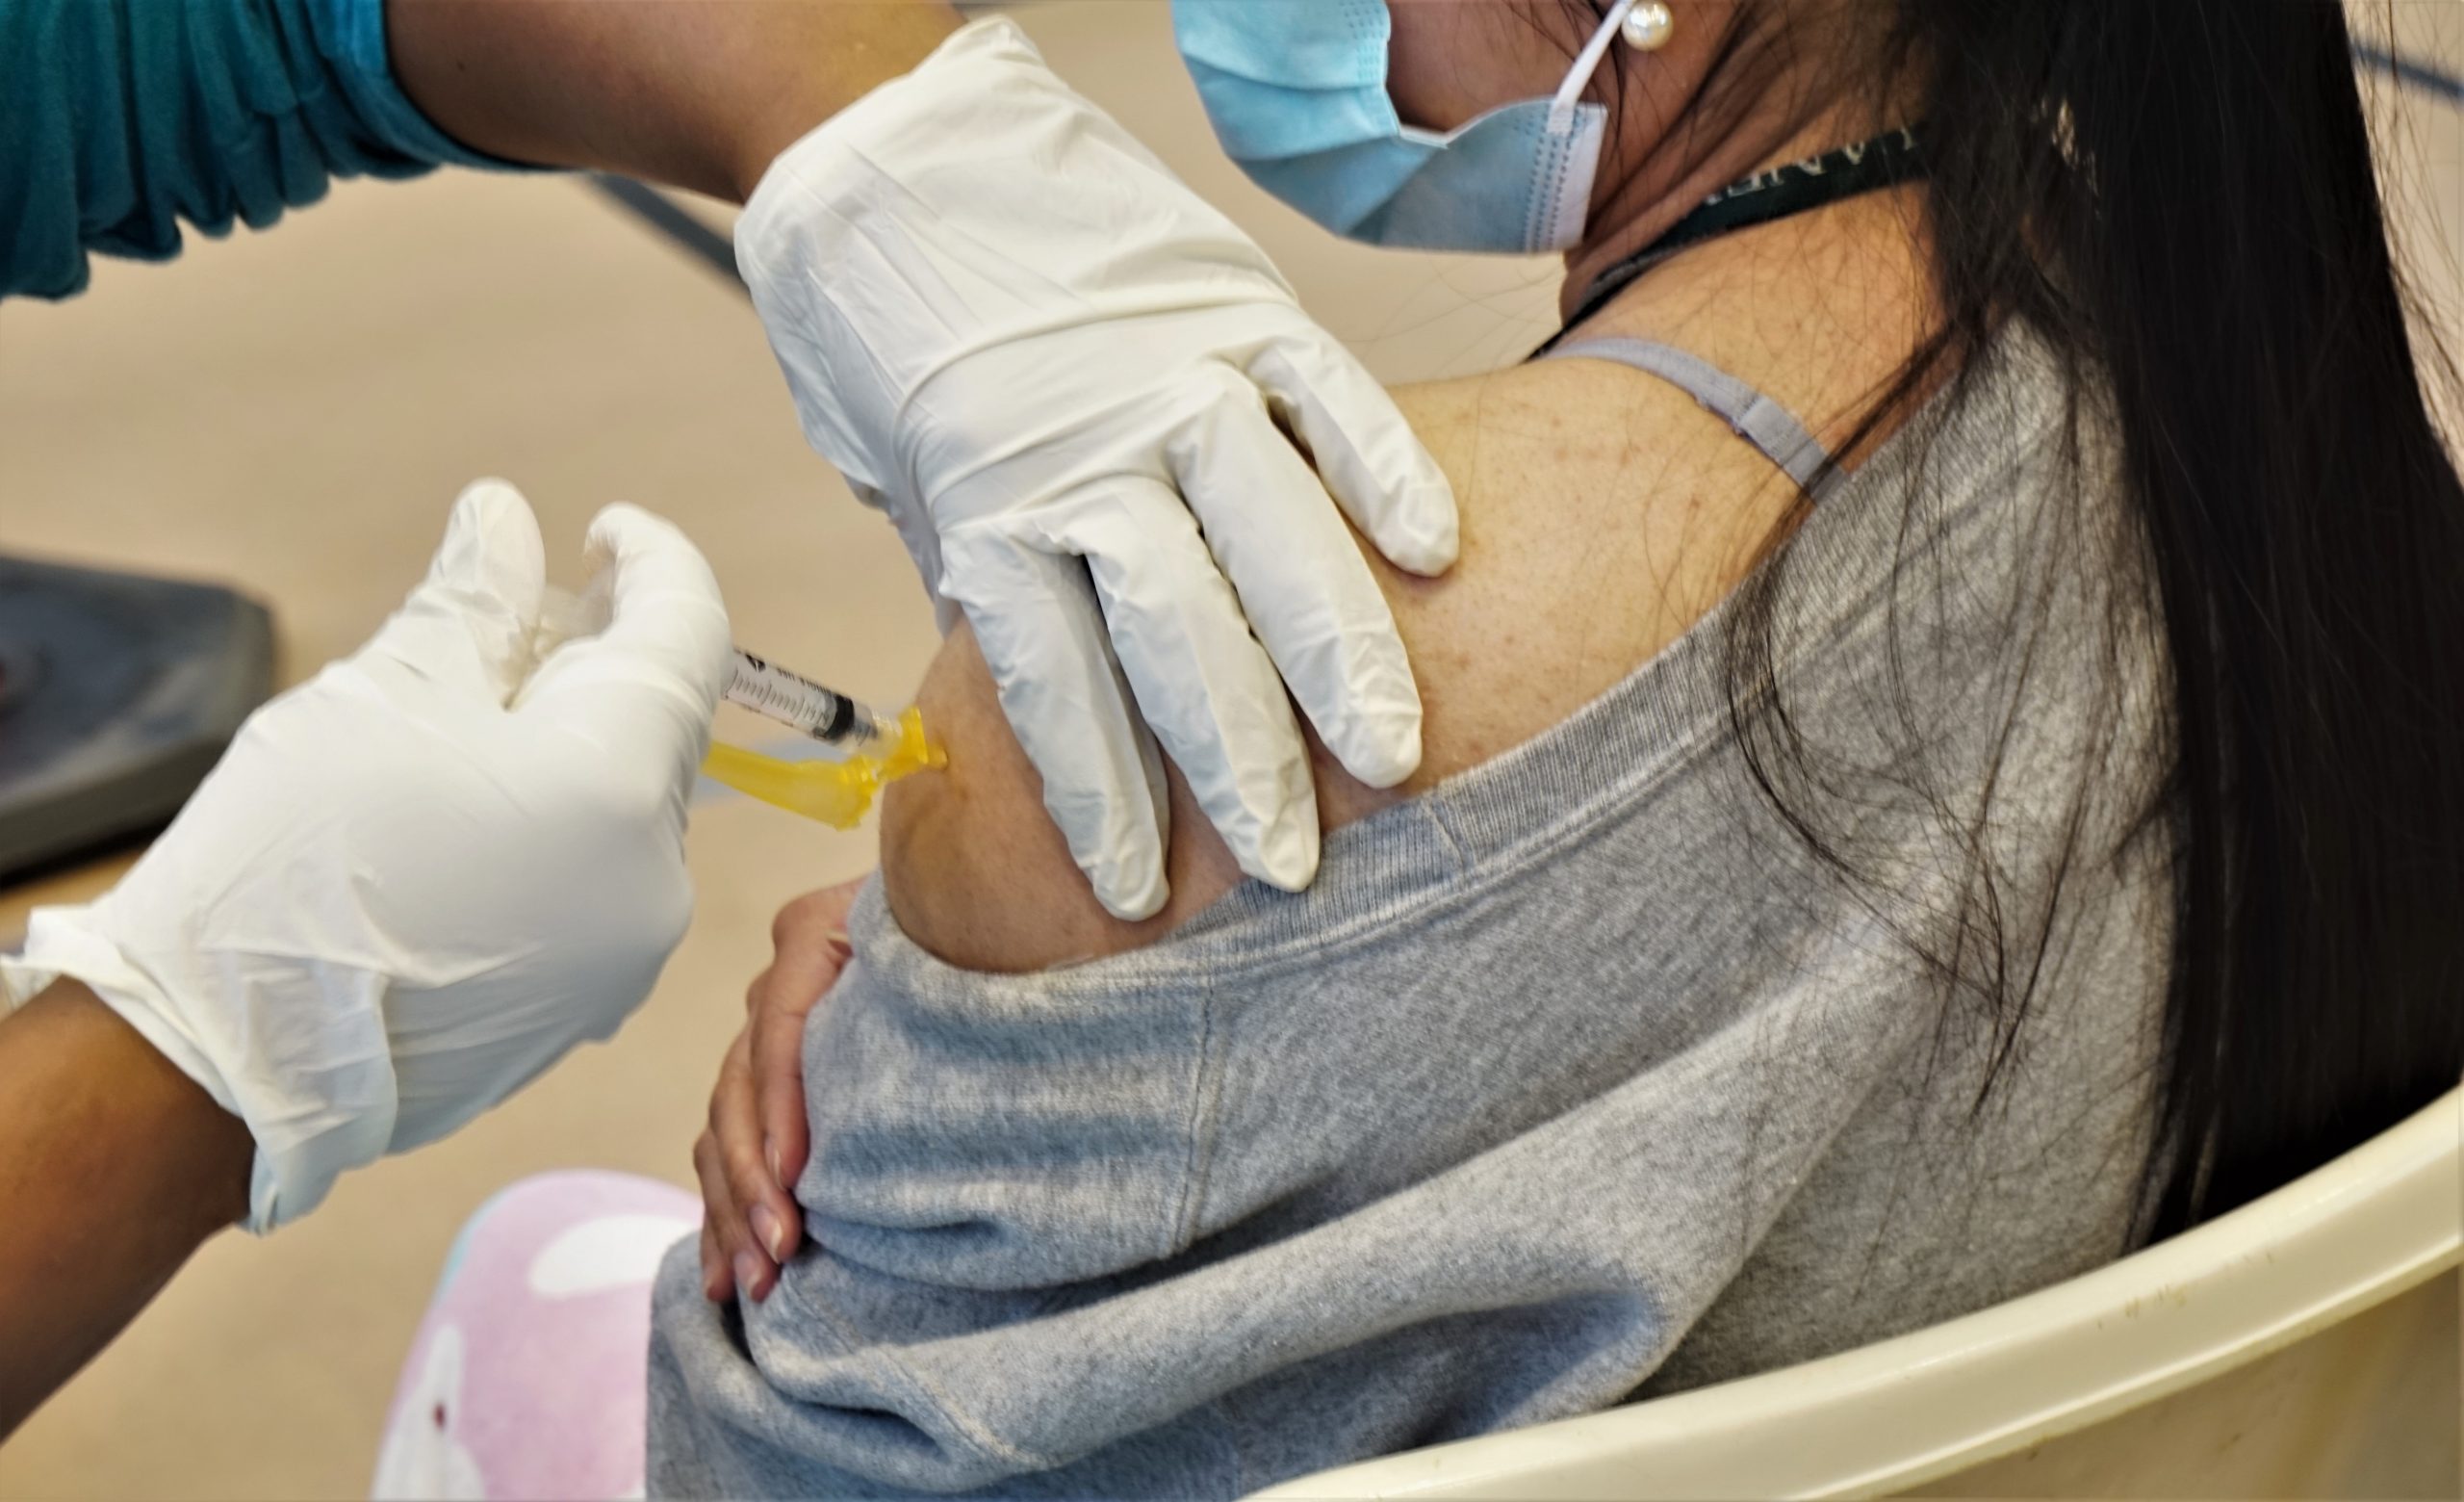 A closeup image of a young woman receiving a shot on her shoulder, with the person administering wearing latex gloves.